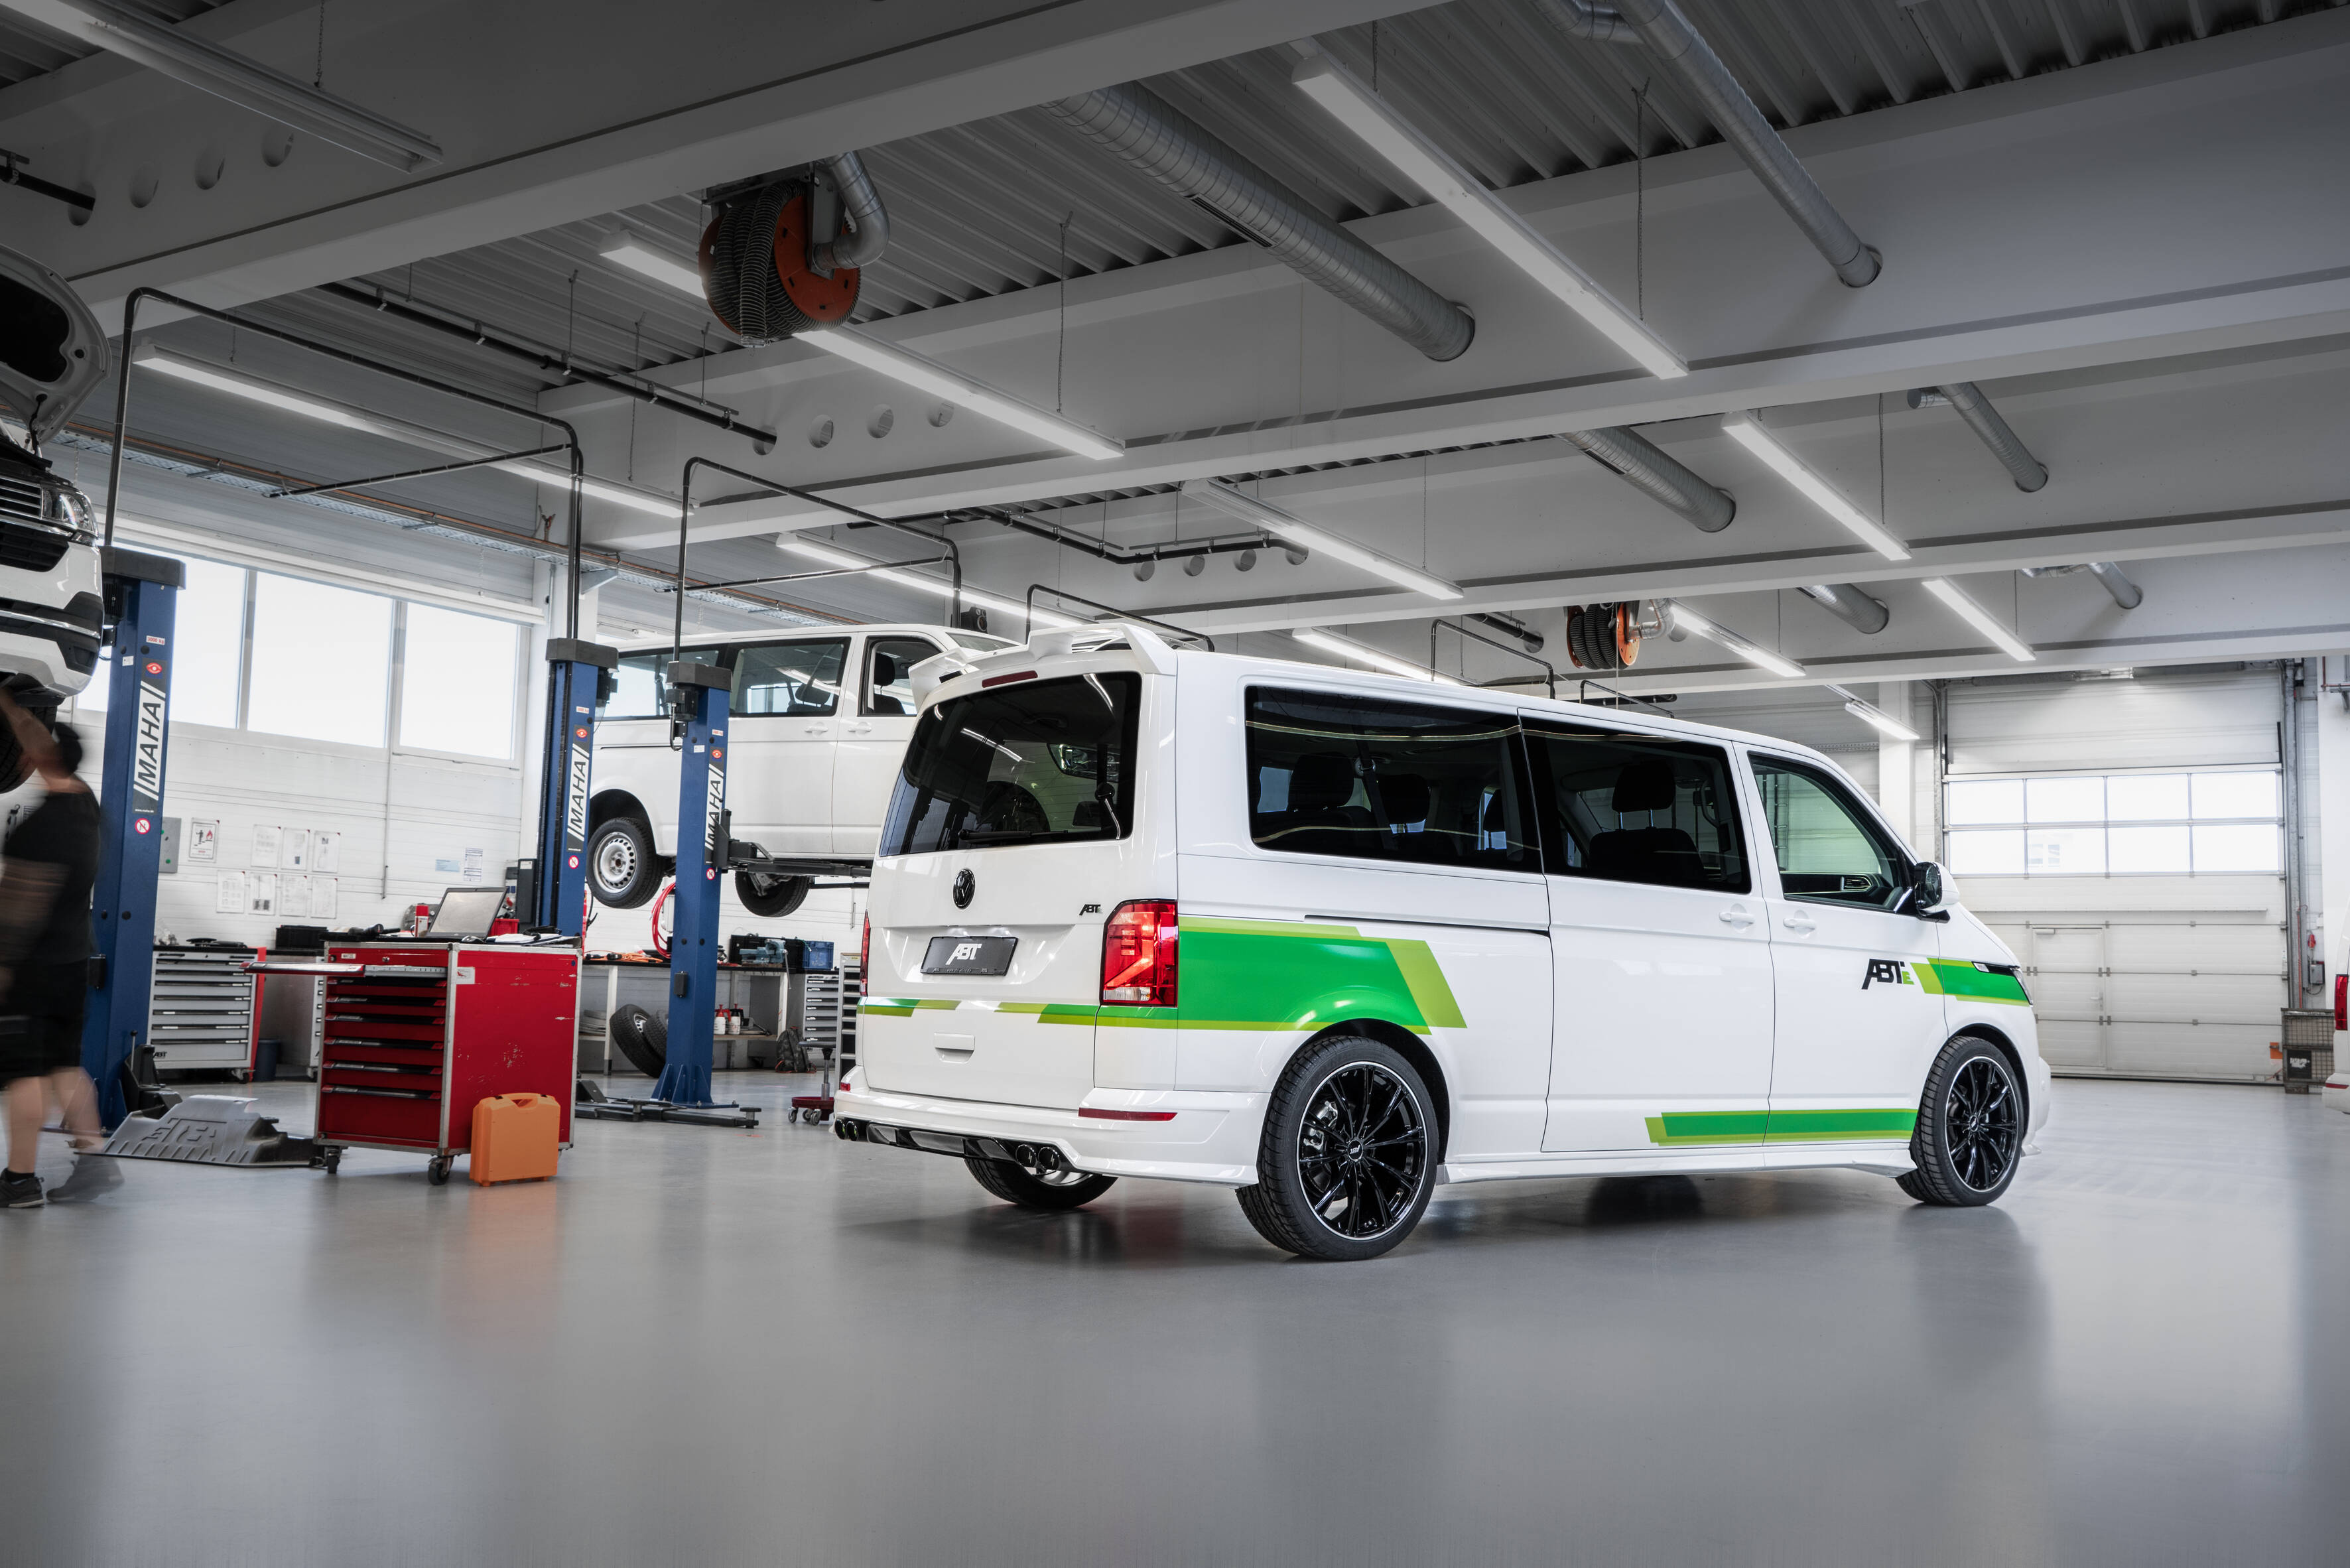 Speed meets space – the Volkswagen T5 promotion model by ABT Sportsline -  Audi Tuning, VW Tuning, Chiptuning von ABT Sportsline.